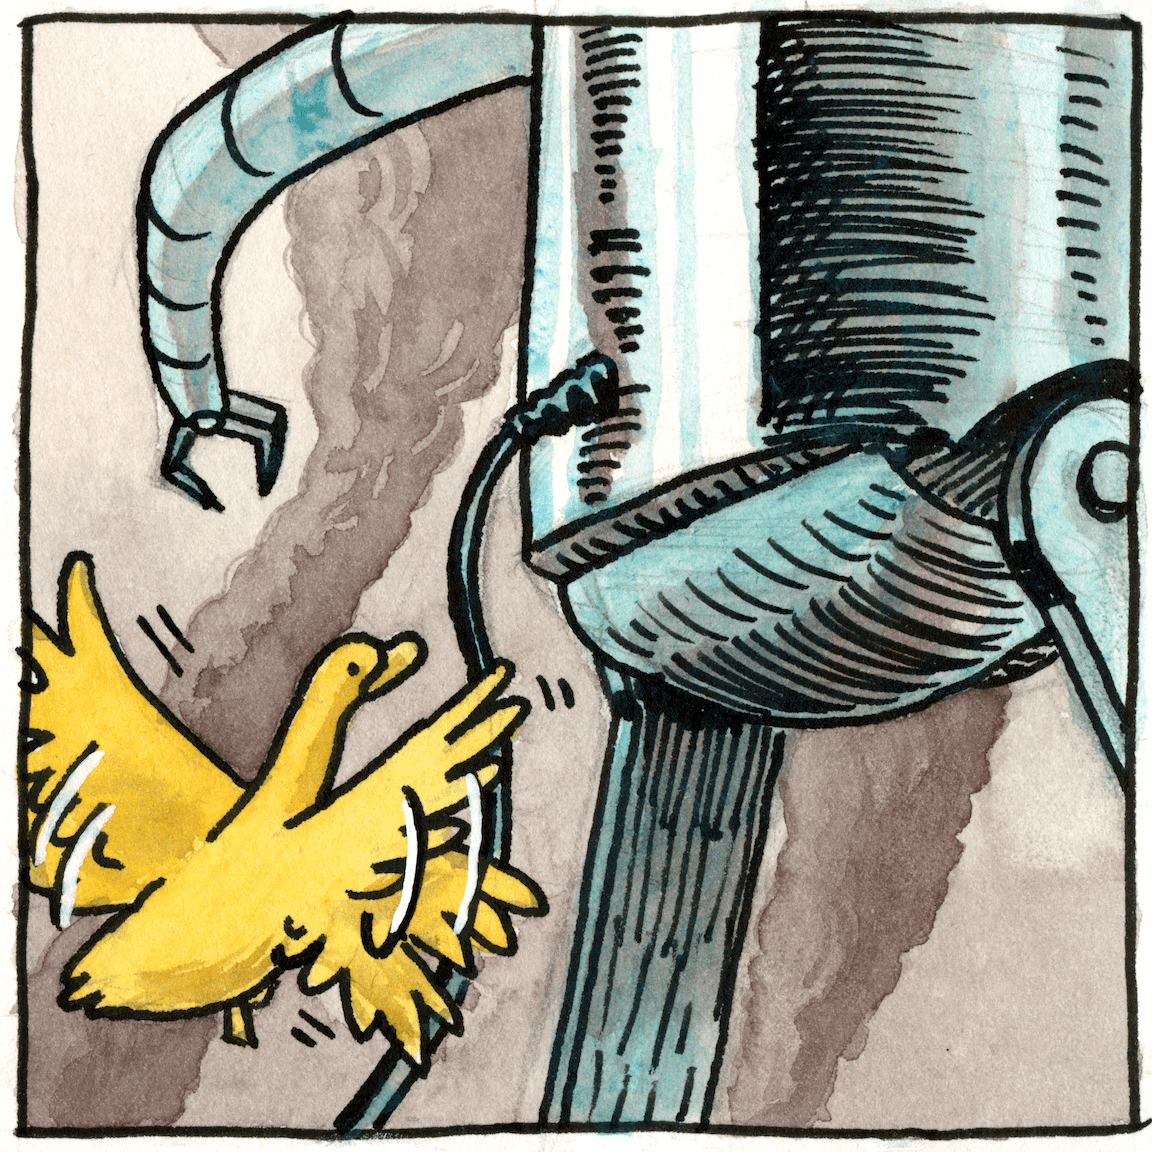 Time Duck Meets a Giant Robot - frame 3